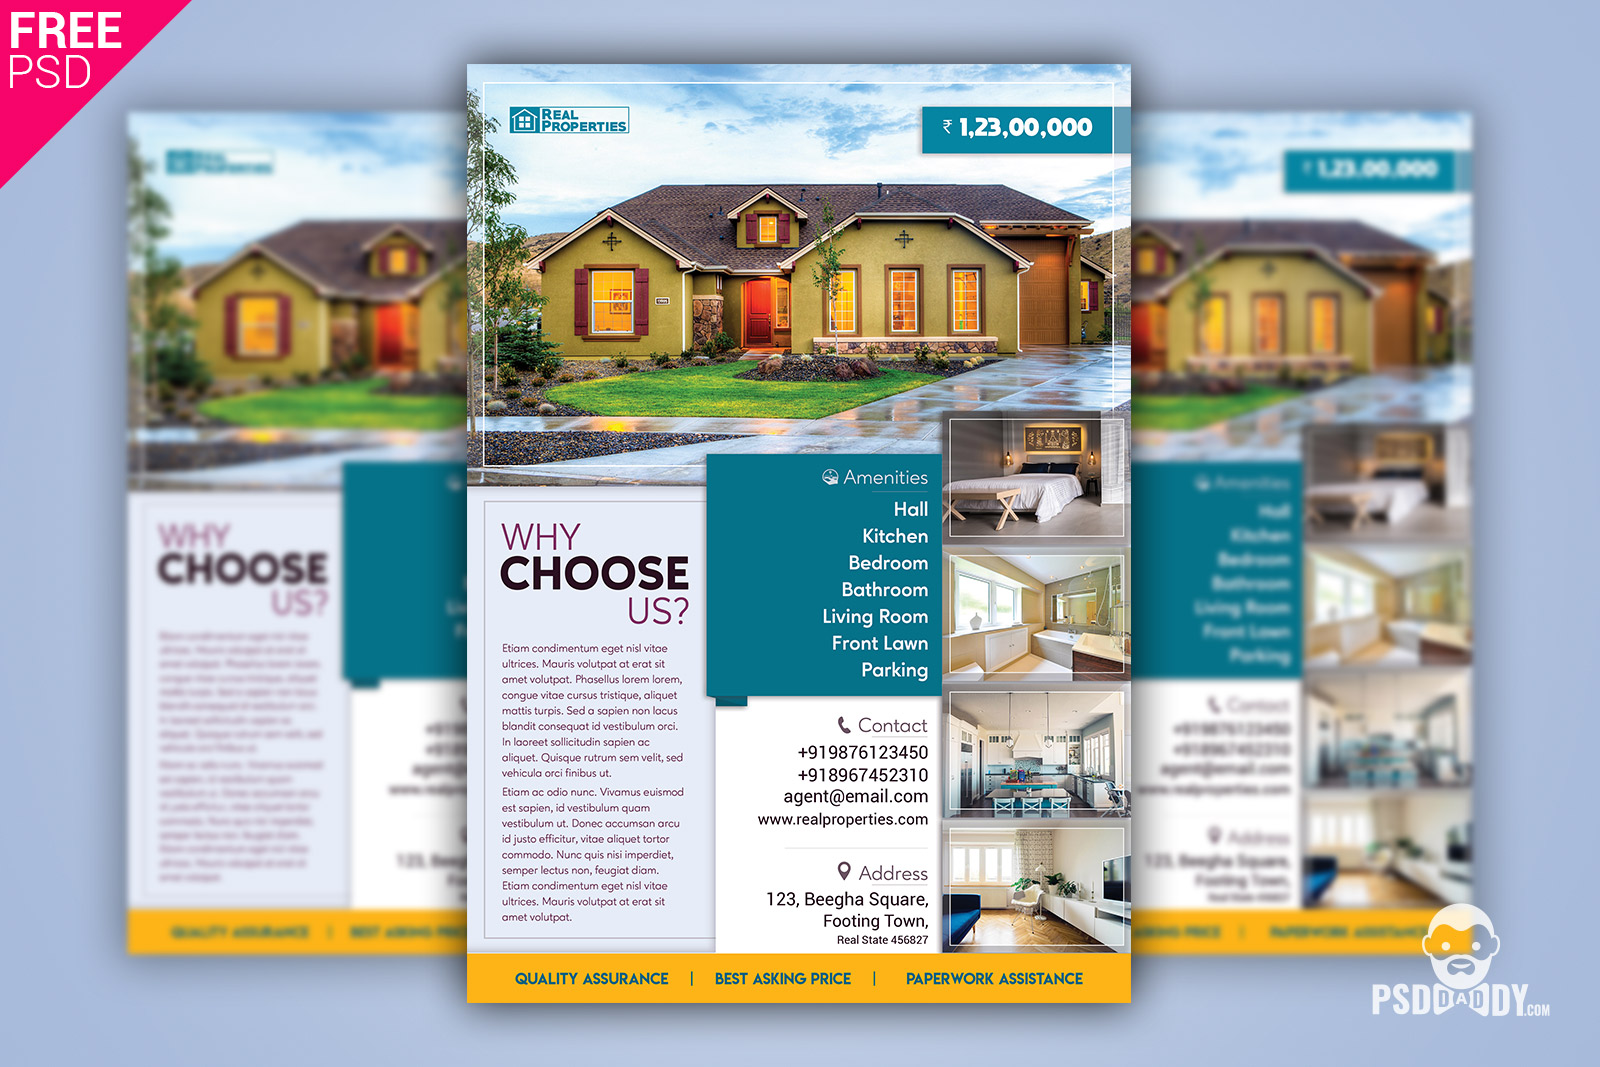 Real Estate Flyer + Social Media Free PSD Template  PsdDaddy.com Intended For Free Real Estate Flyer Templates Word